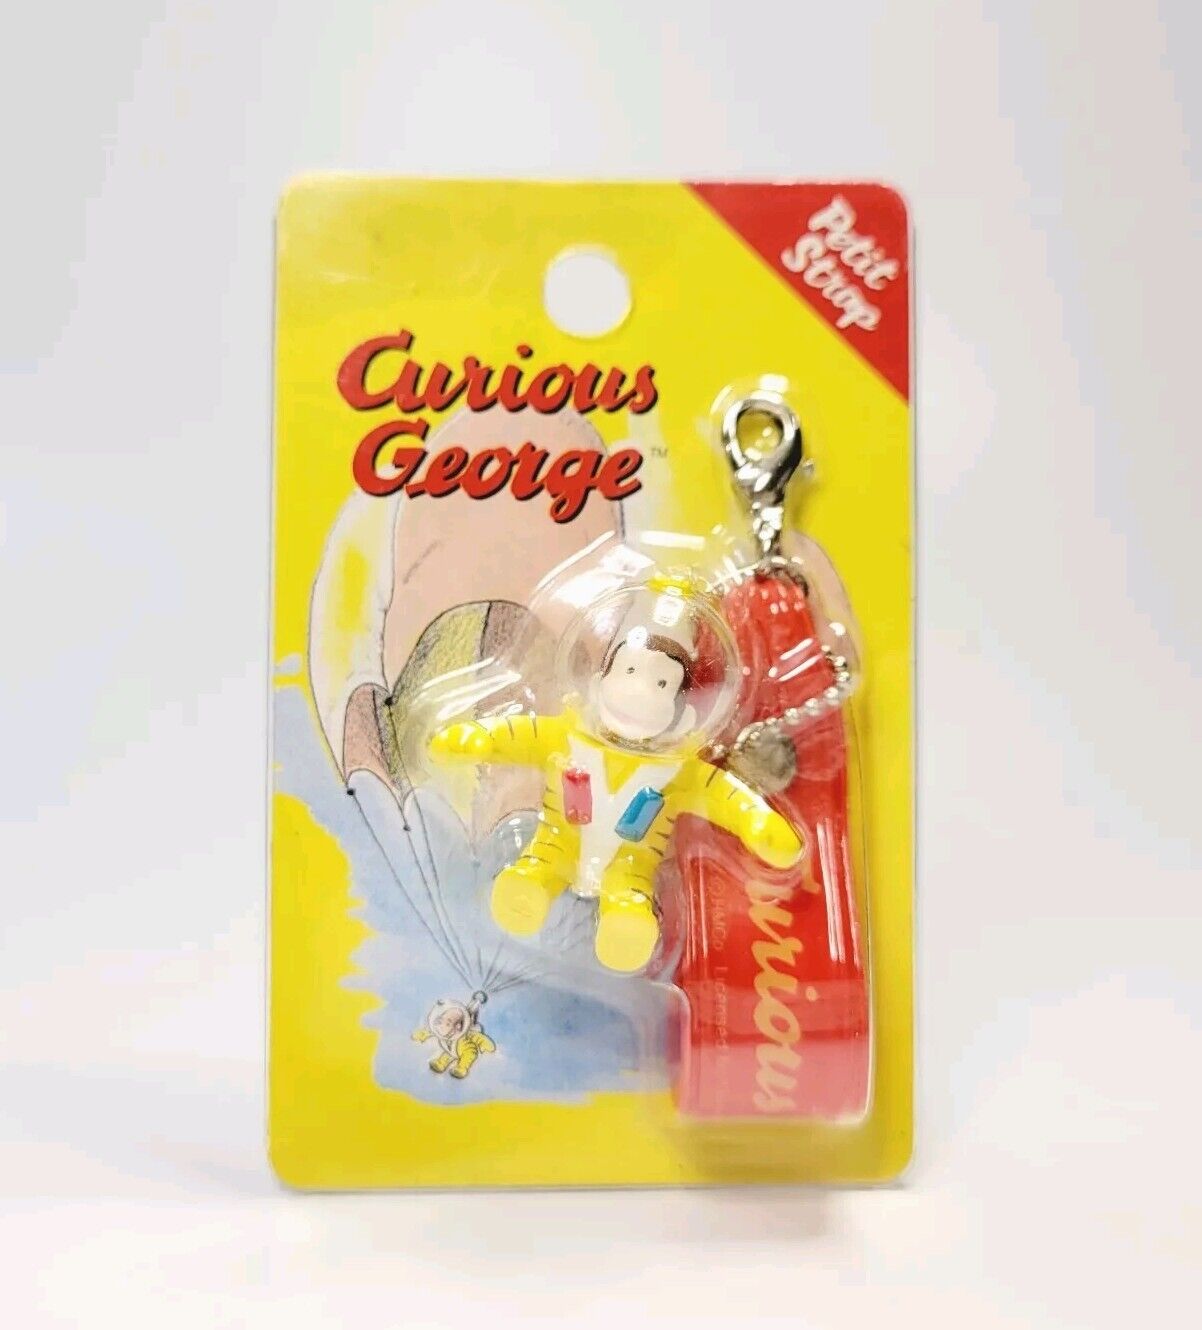 Curious George Collectible Petite Strap/Key Chain NIP New Sealed Rare 